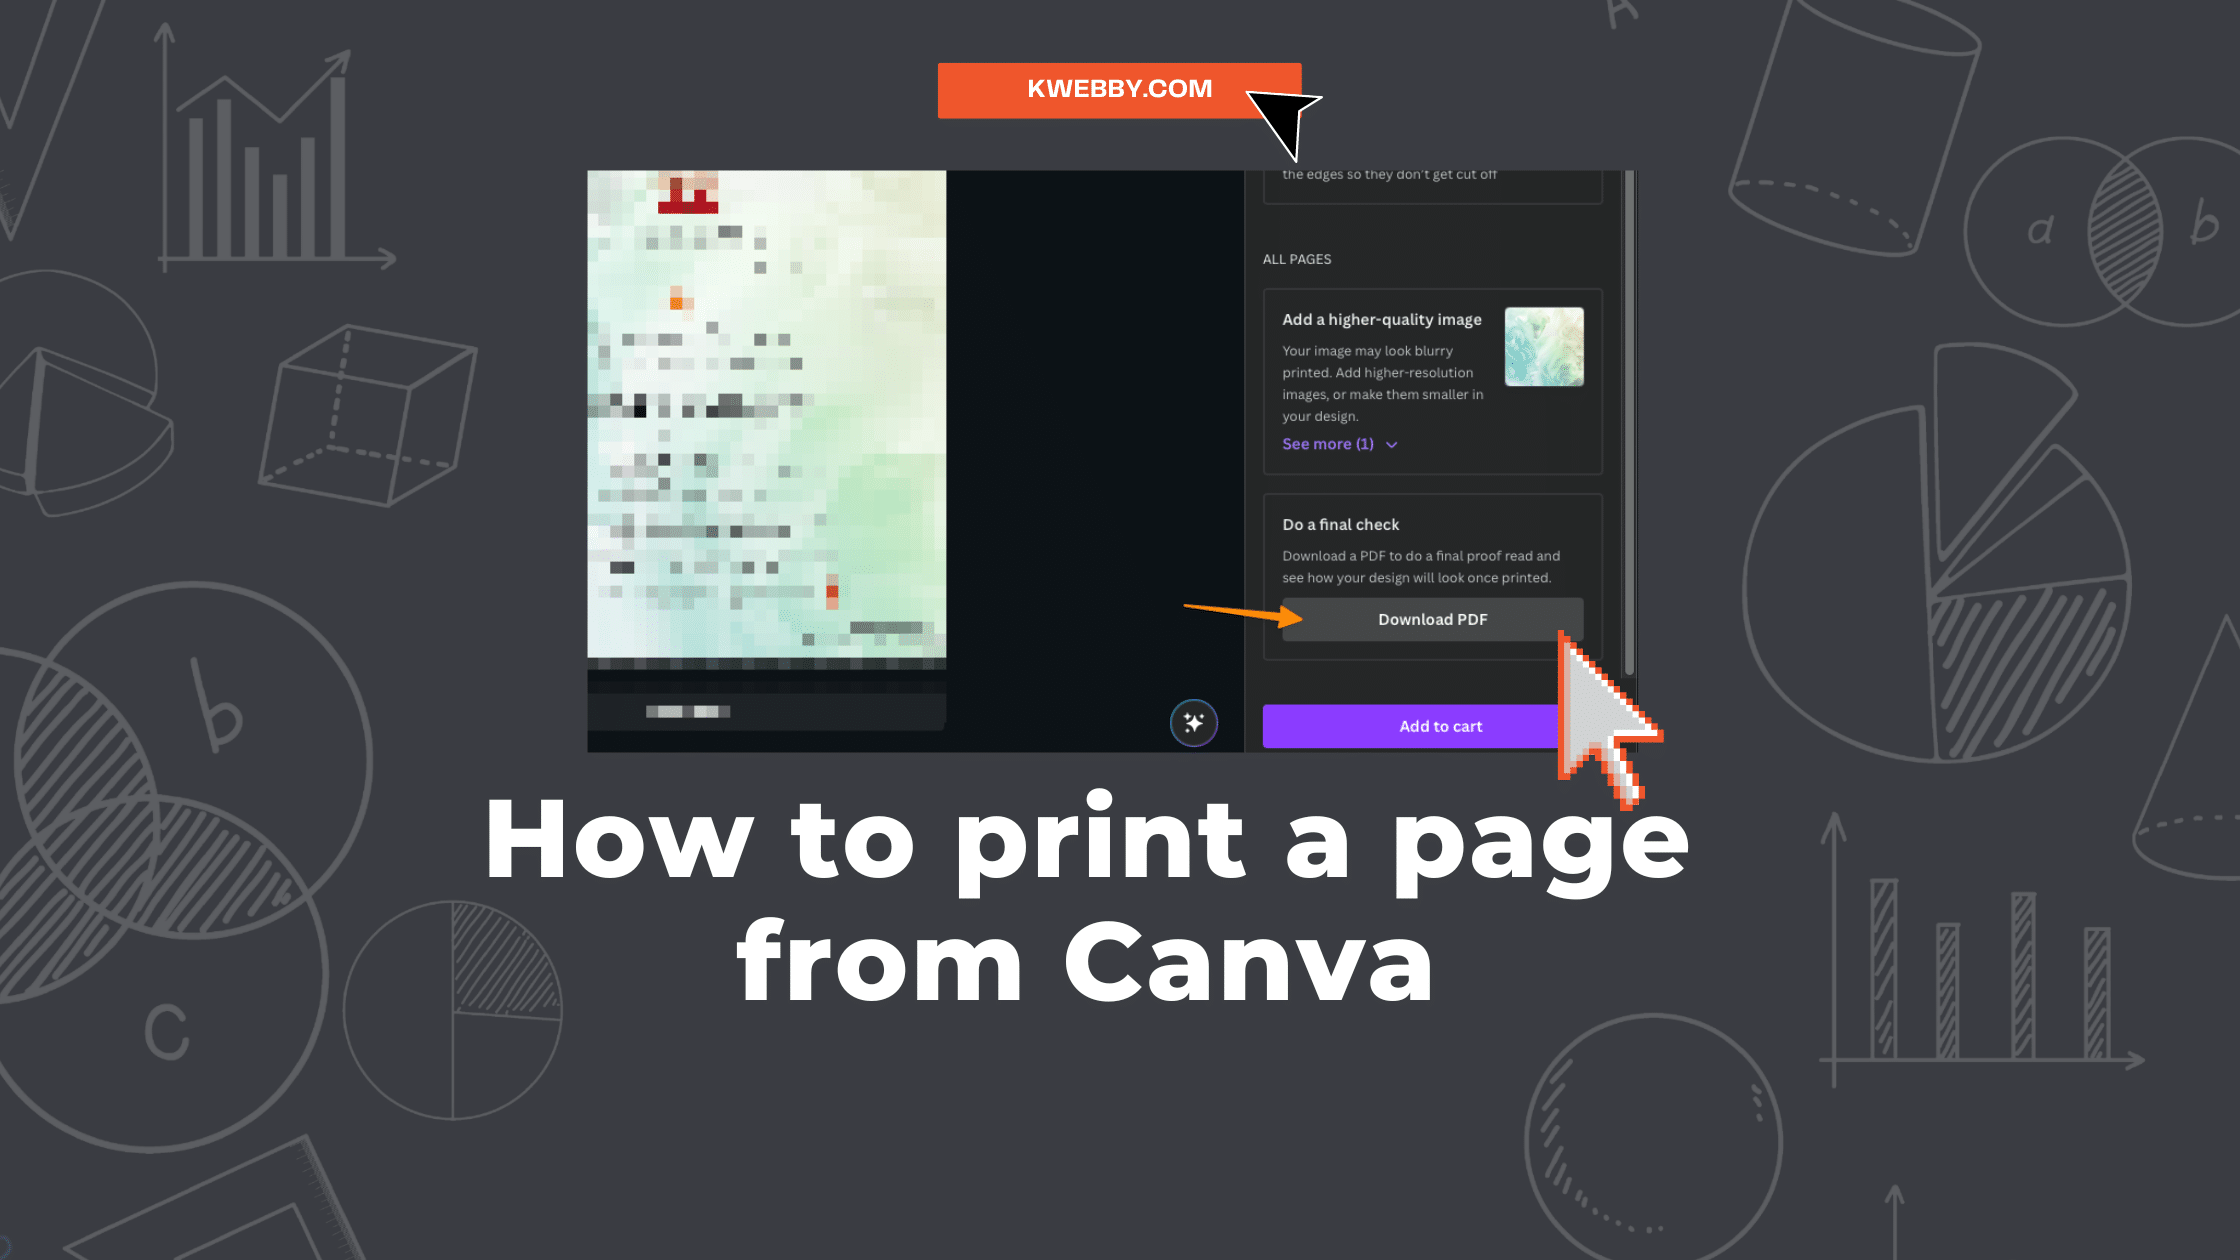 How to print a page from Canva